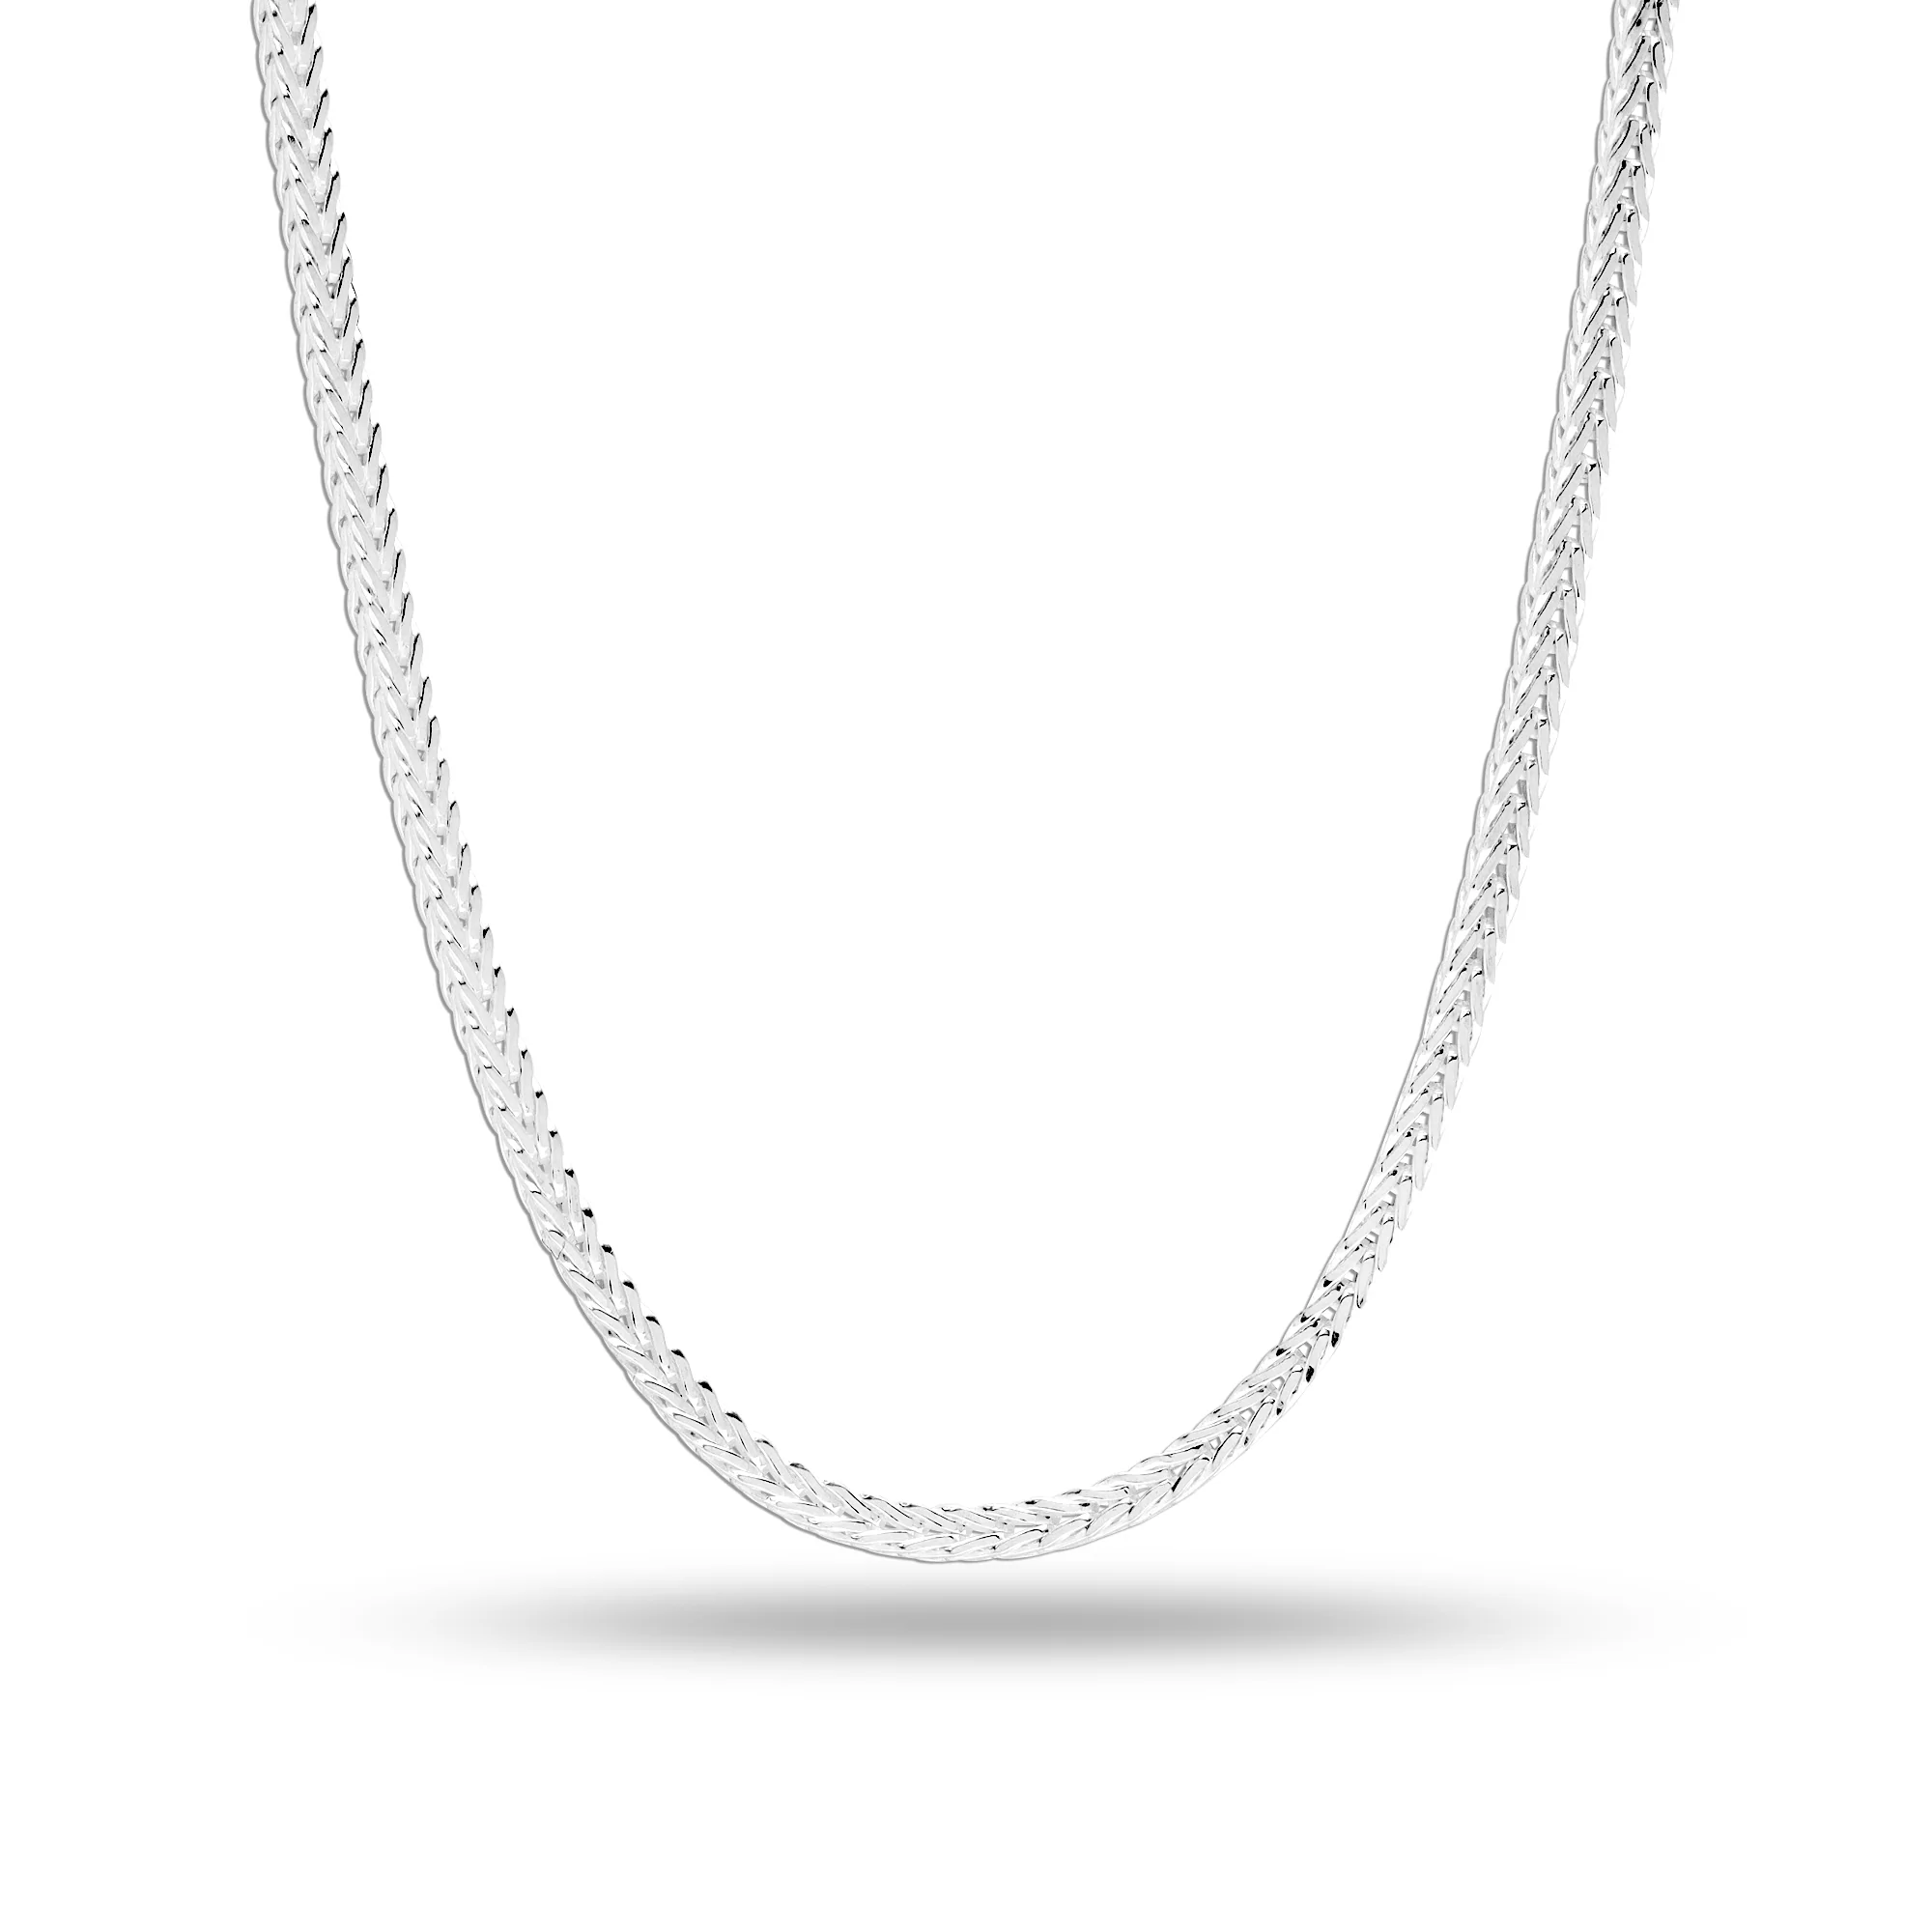 Gold Plated White American Diamond Necklace Golden Chain Pendant for Women  and Girls Golden Interlink Criss